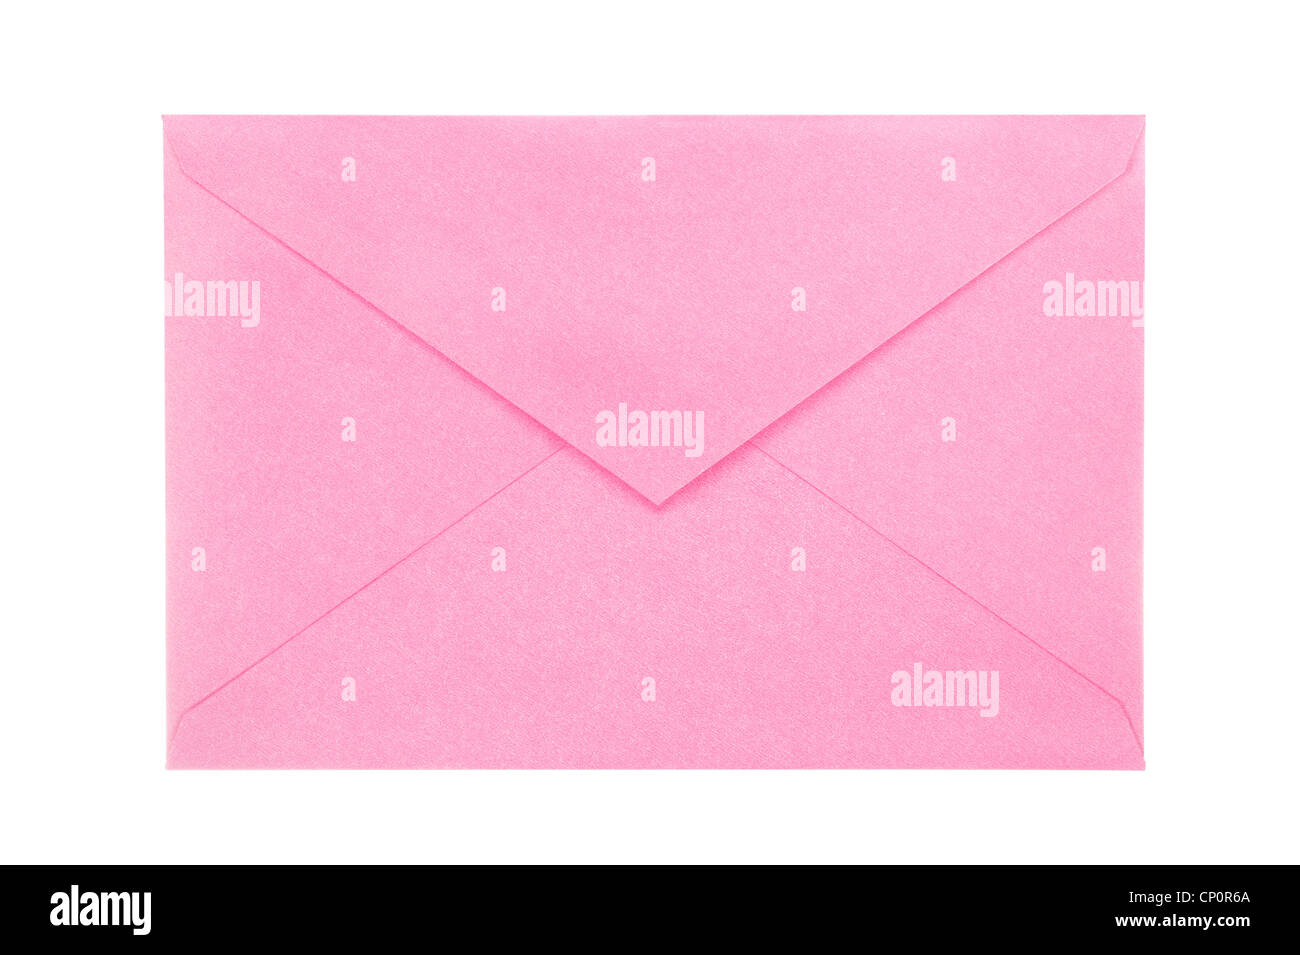 A new, blank, open pink envelope isolated on white for user convenience. Stock Photo